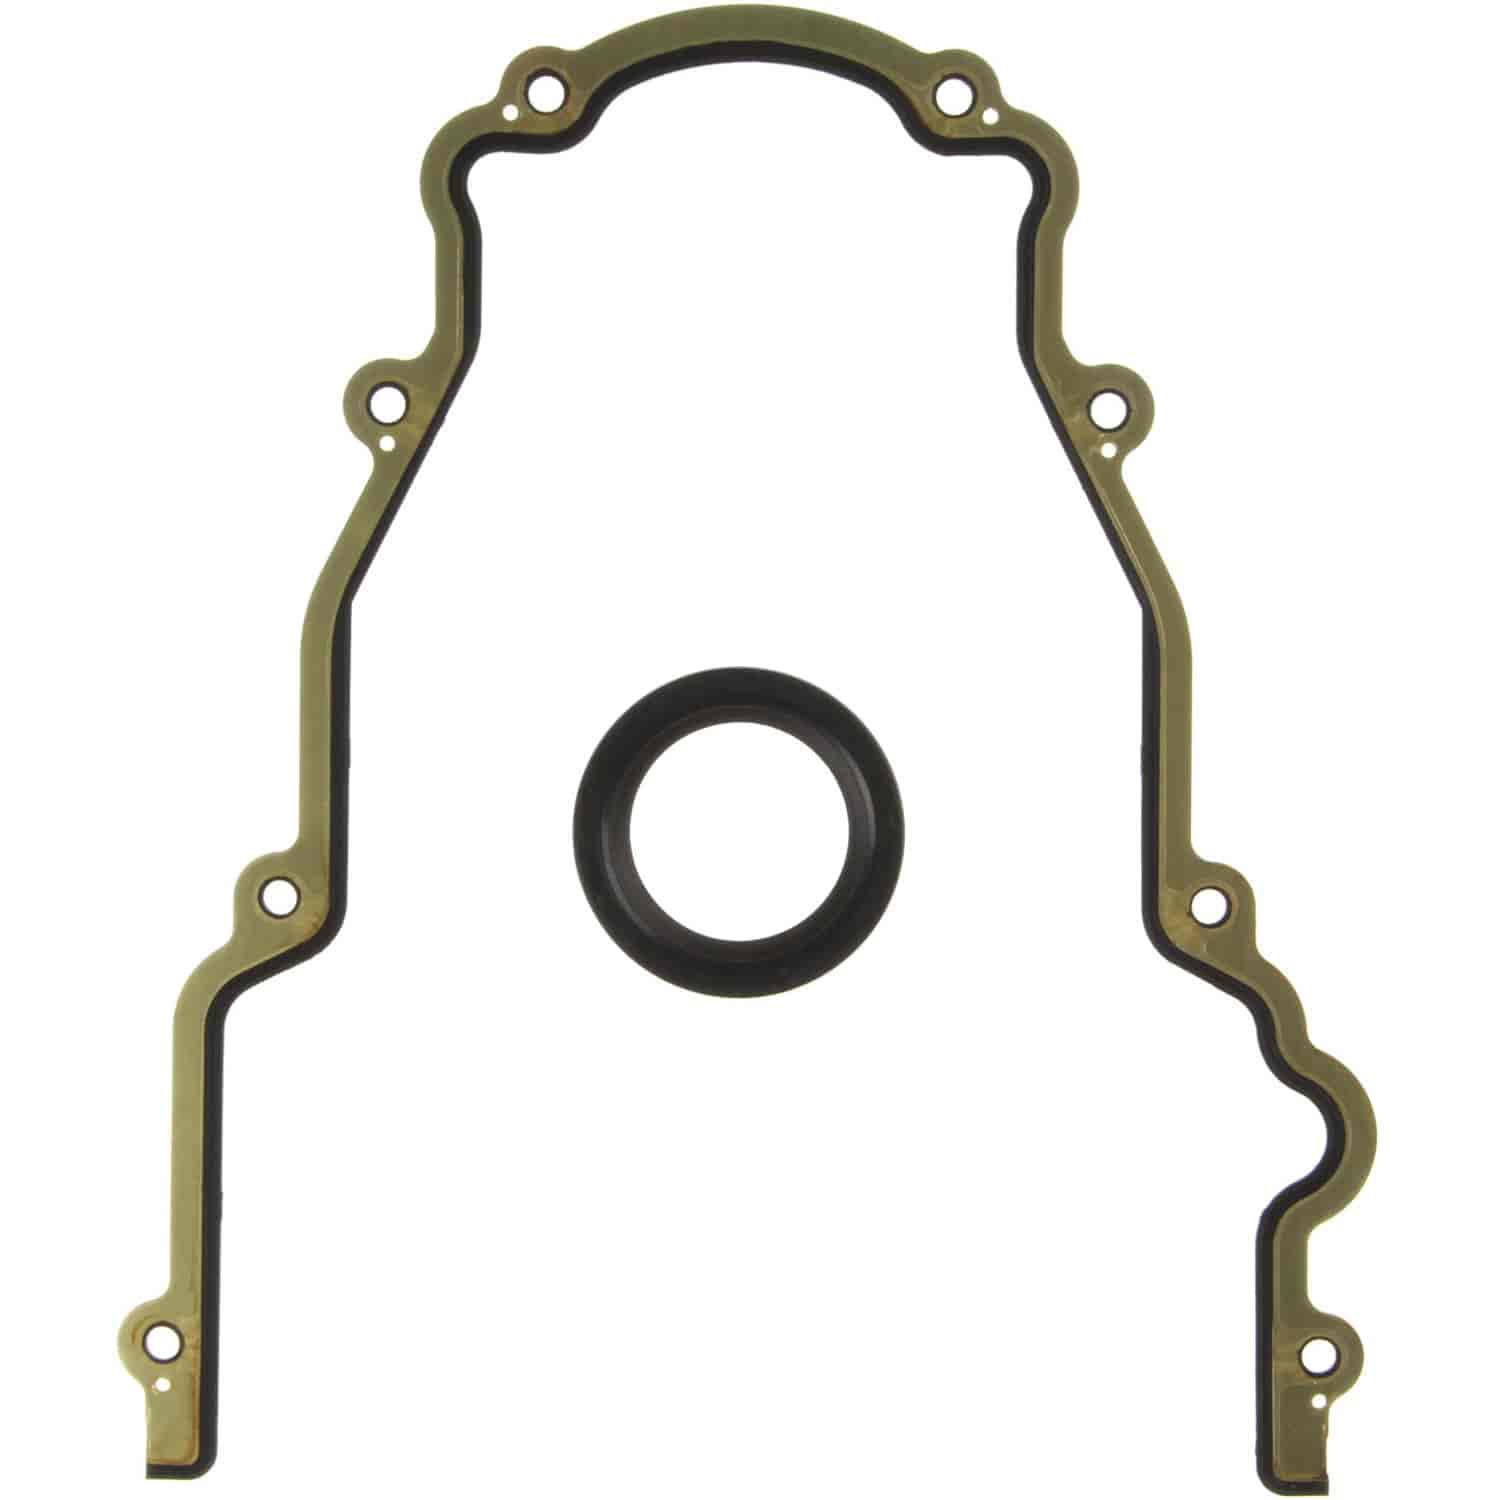 Timing Cover Gasket Set 1997-2014 Chevy LS V8